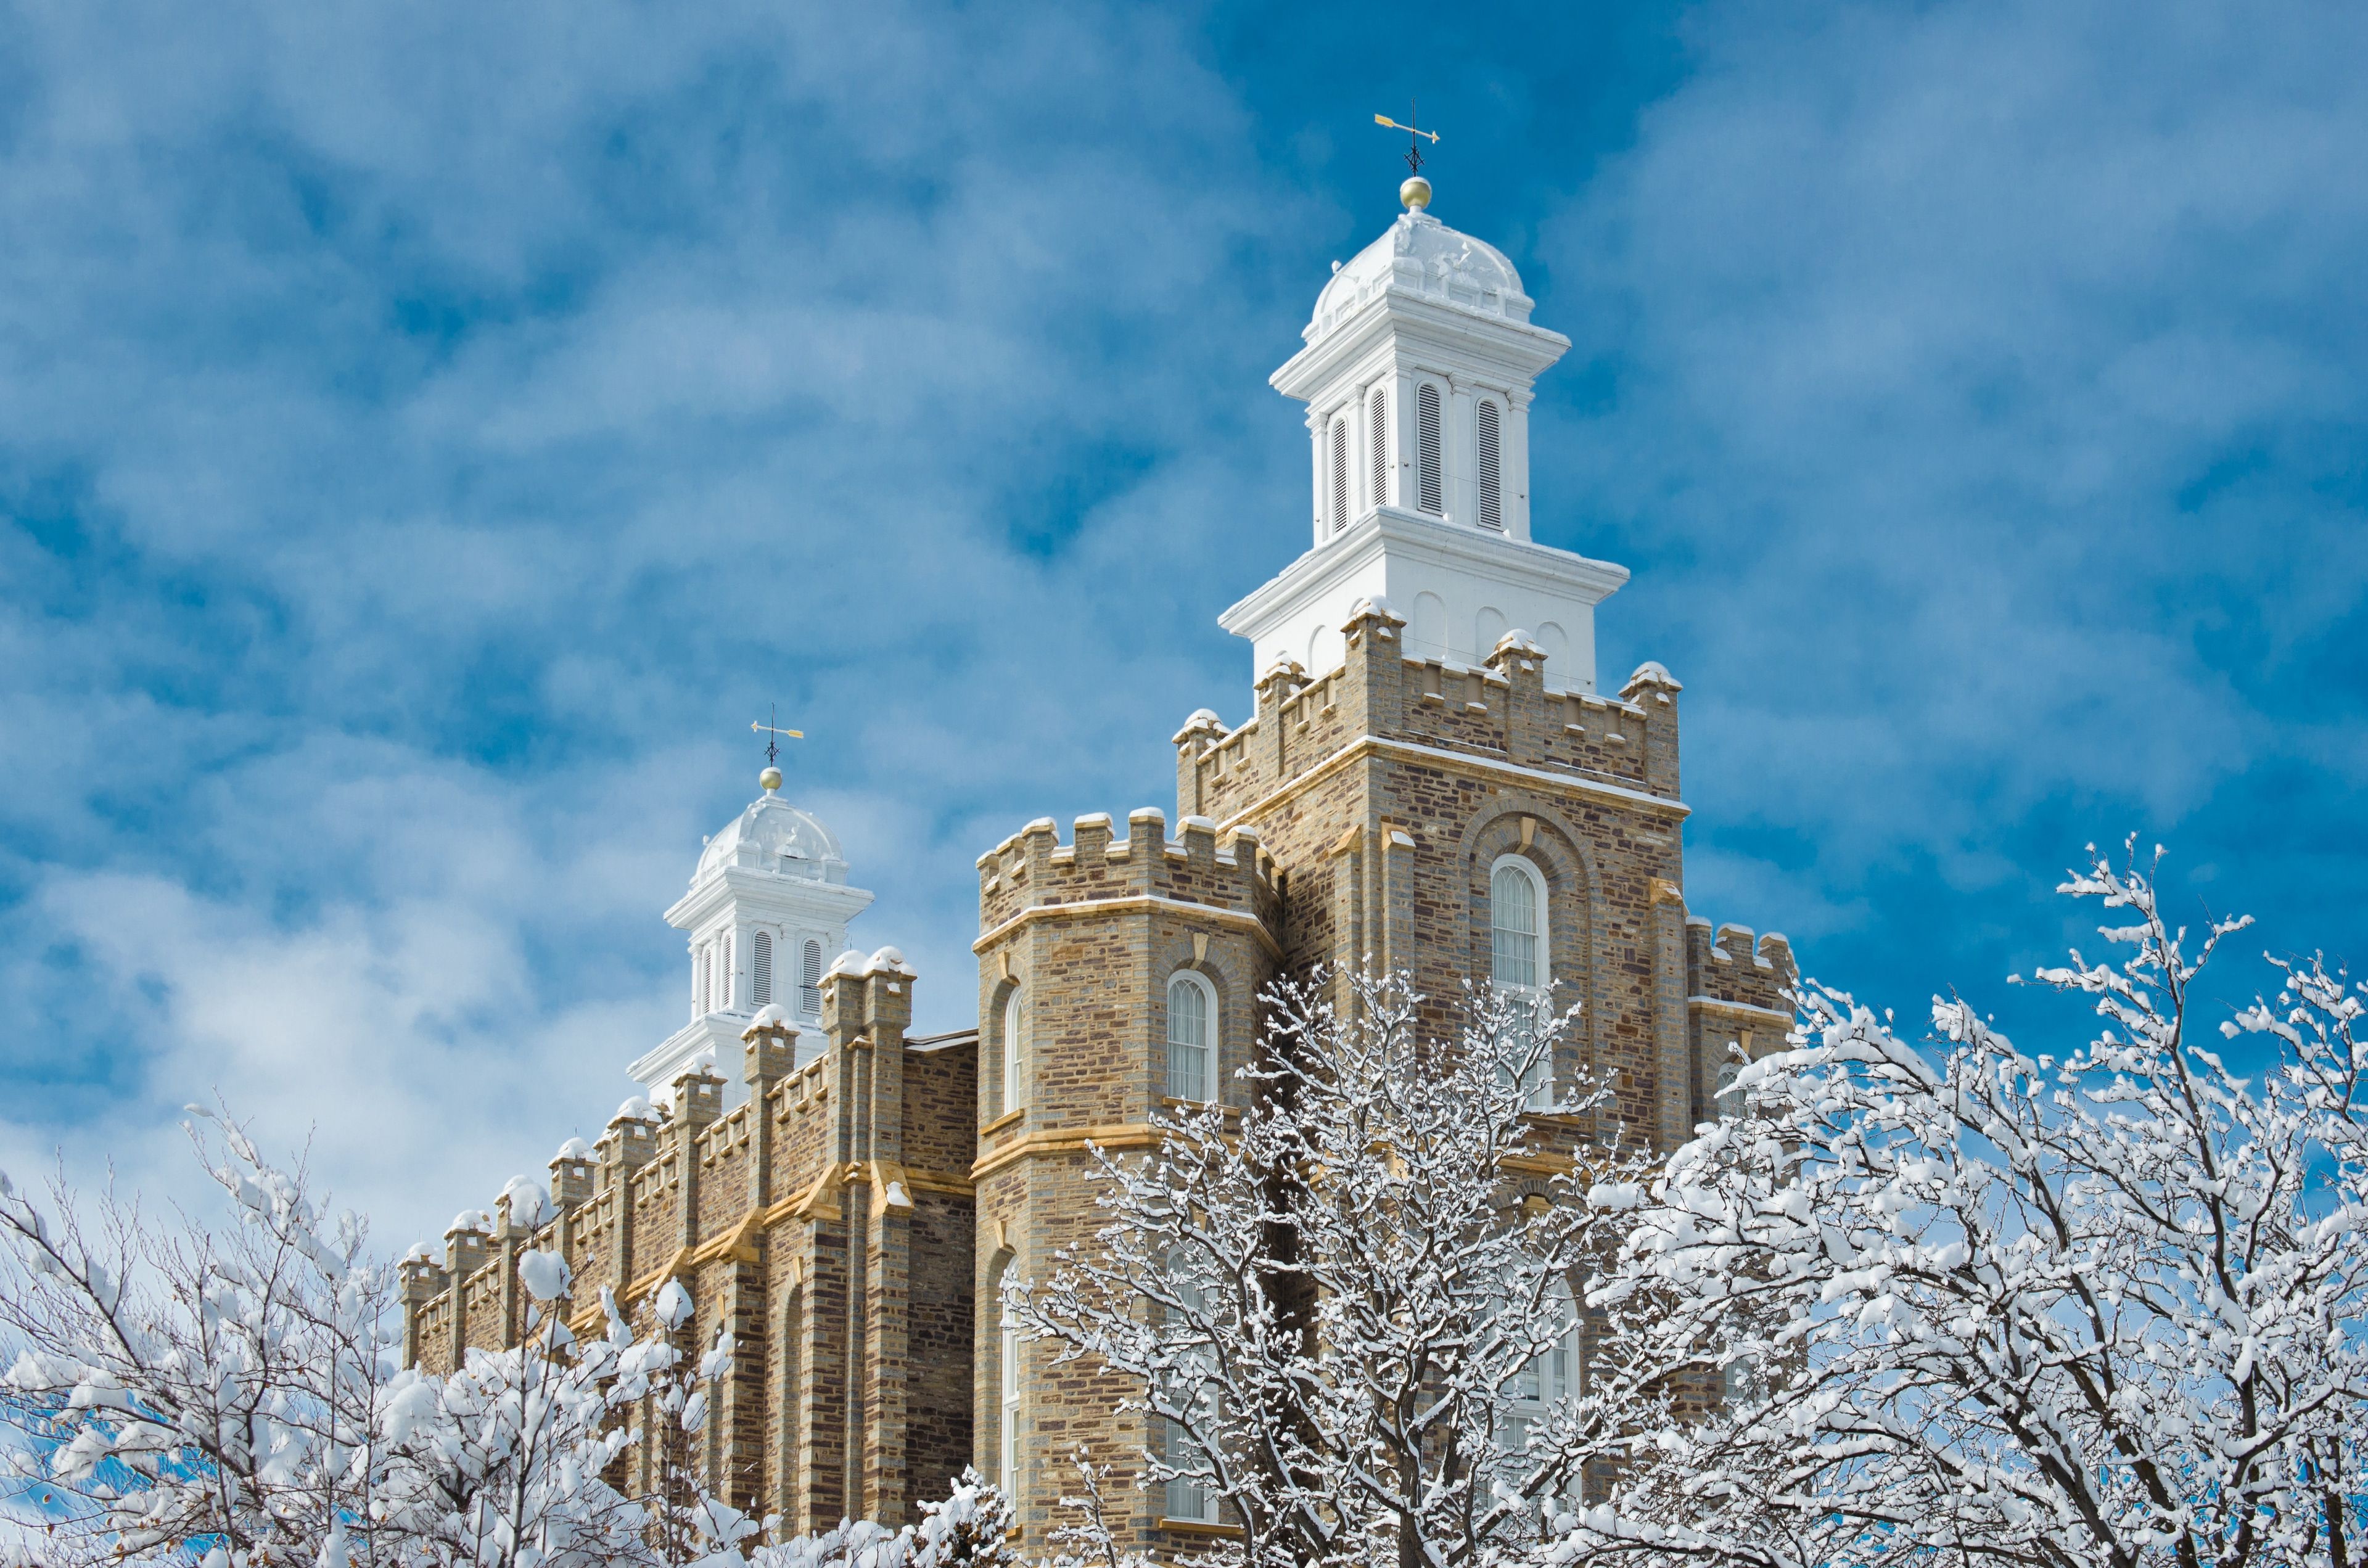 The Logan Utah Temple in the winter, including spires and exterior of temple.